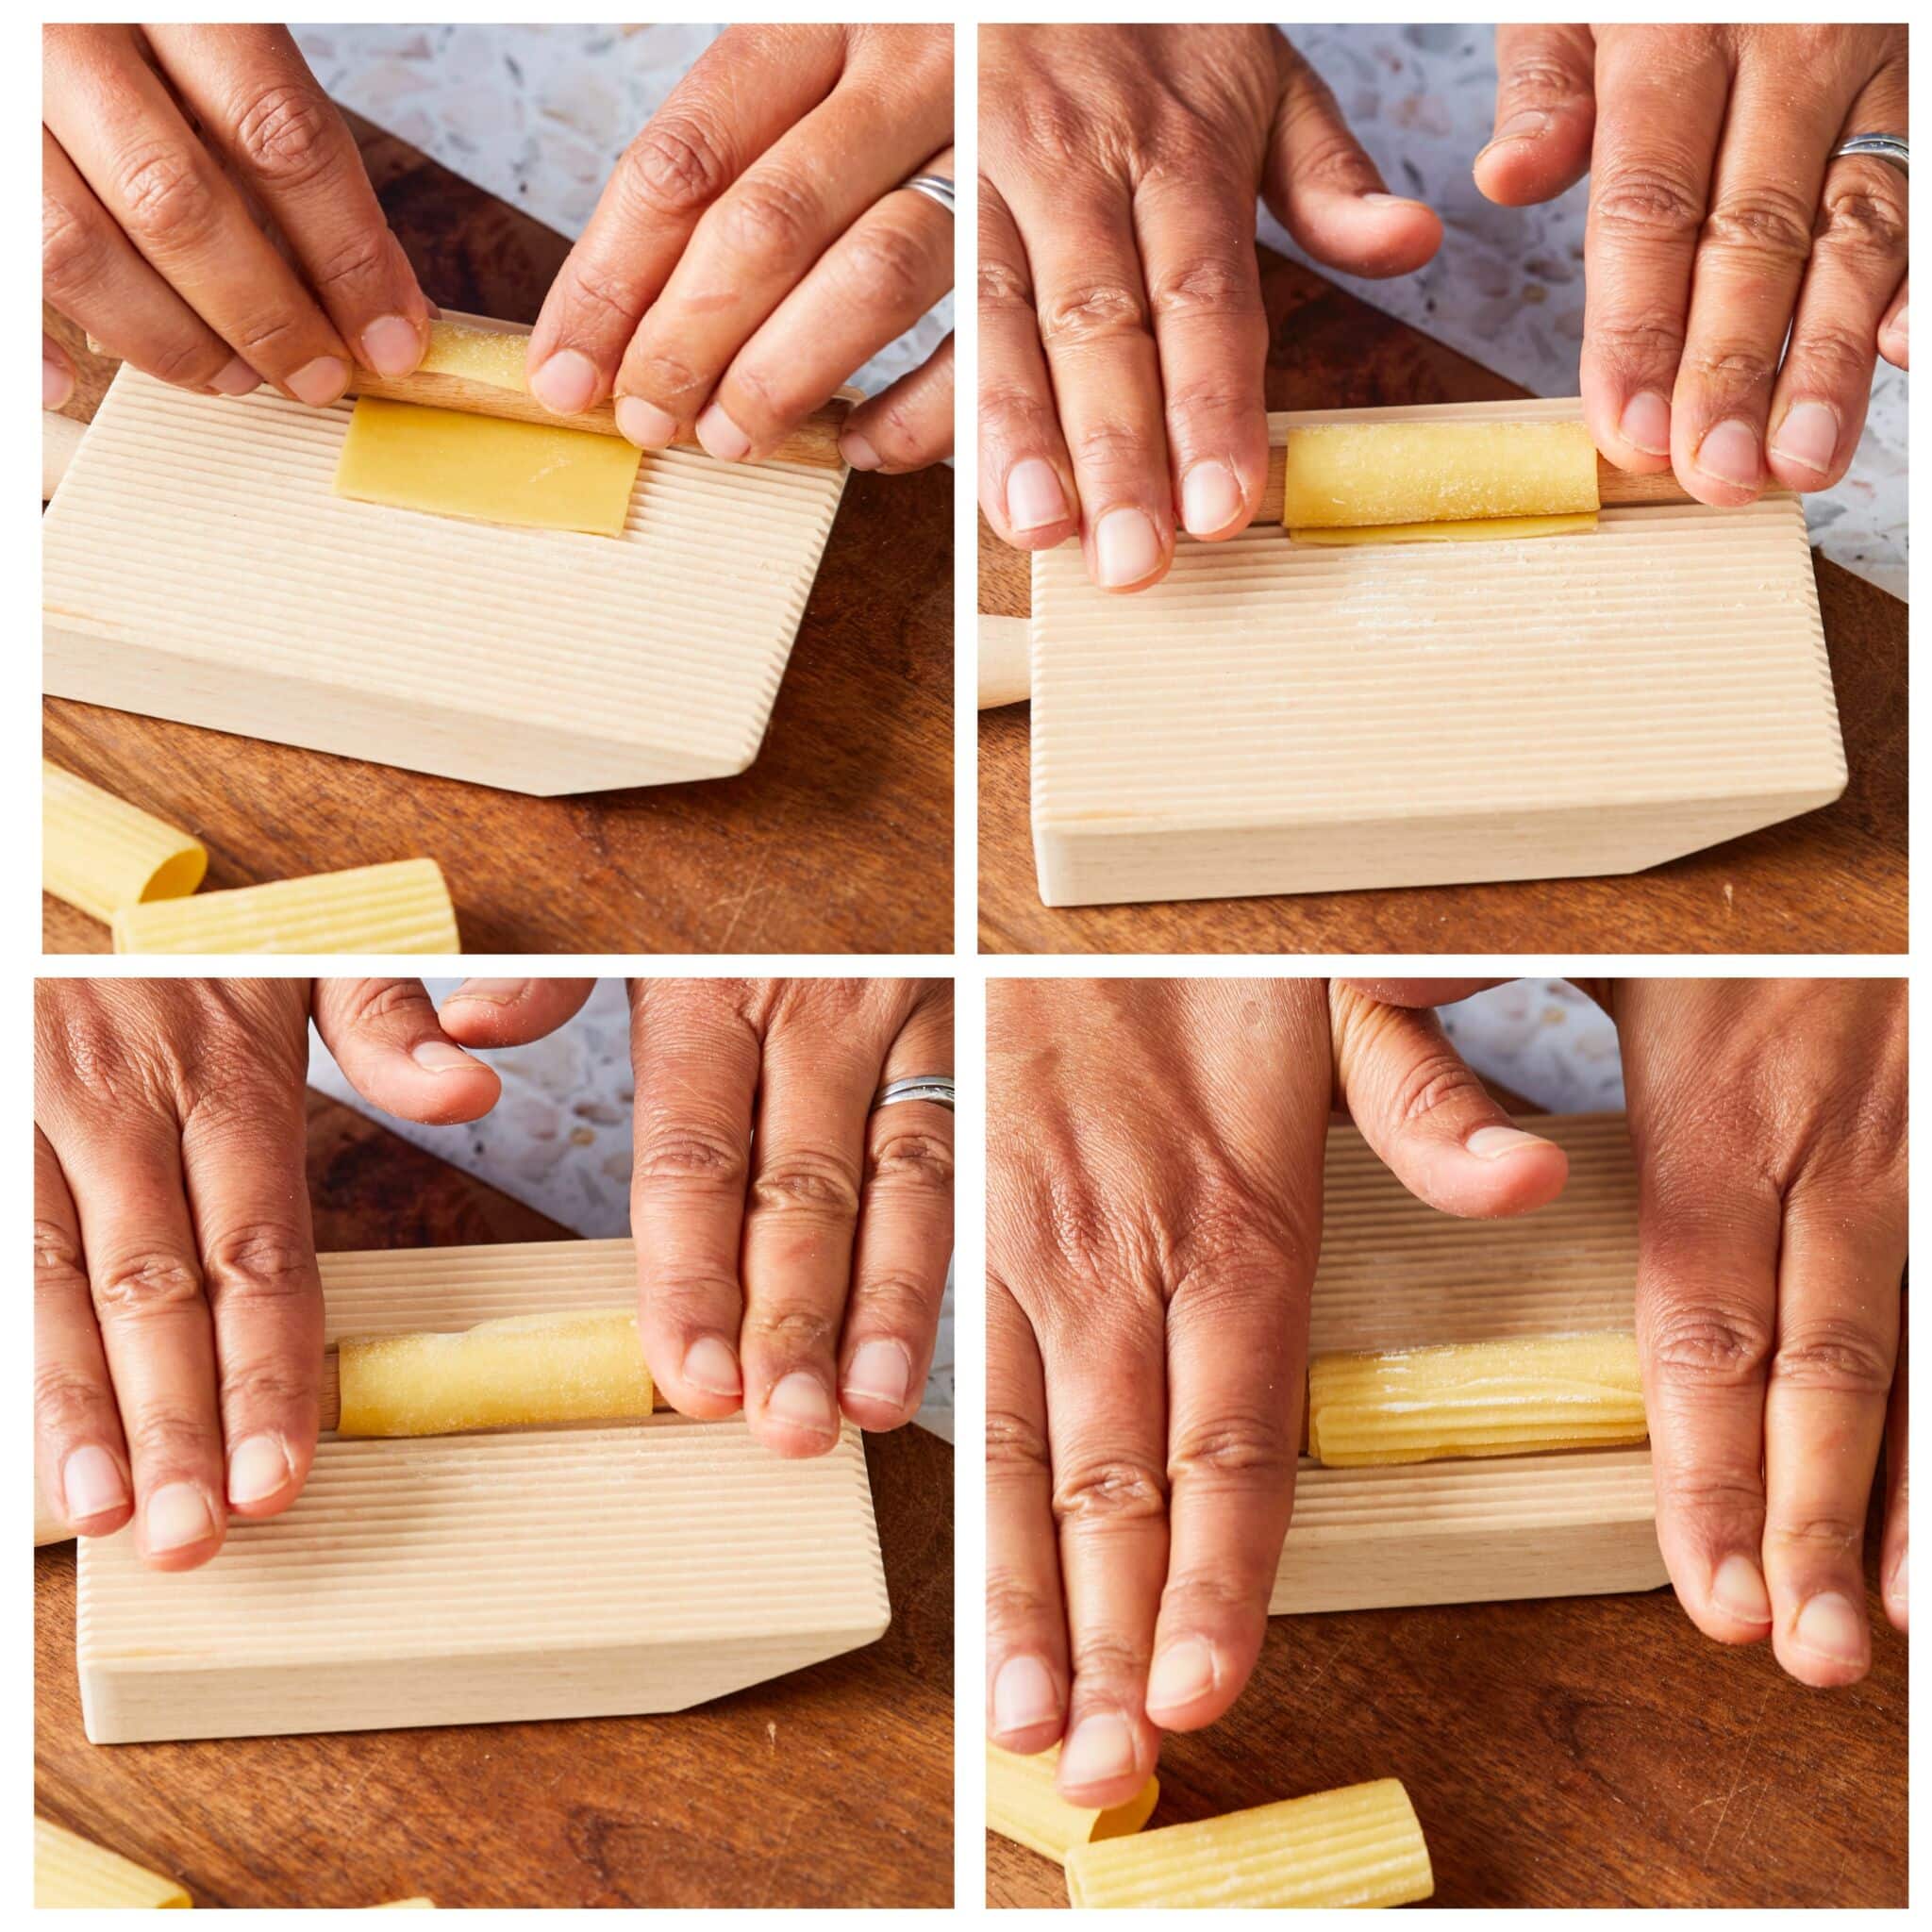 Step-by-step instruction on how to make Rigatoni pasta: place a piece of dough on the gnocchi board in a square orientation. Place the dowel on the square of dough, form the dough around the dowel, and roll and press on the gnocchi board to make ridges. While the dough is around the dowel, press the ends together to make a seam.